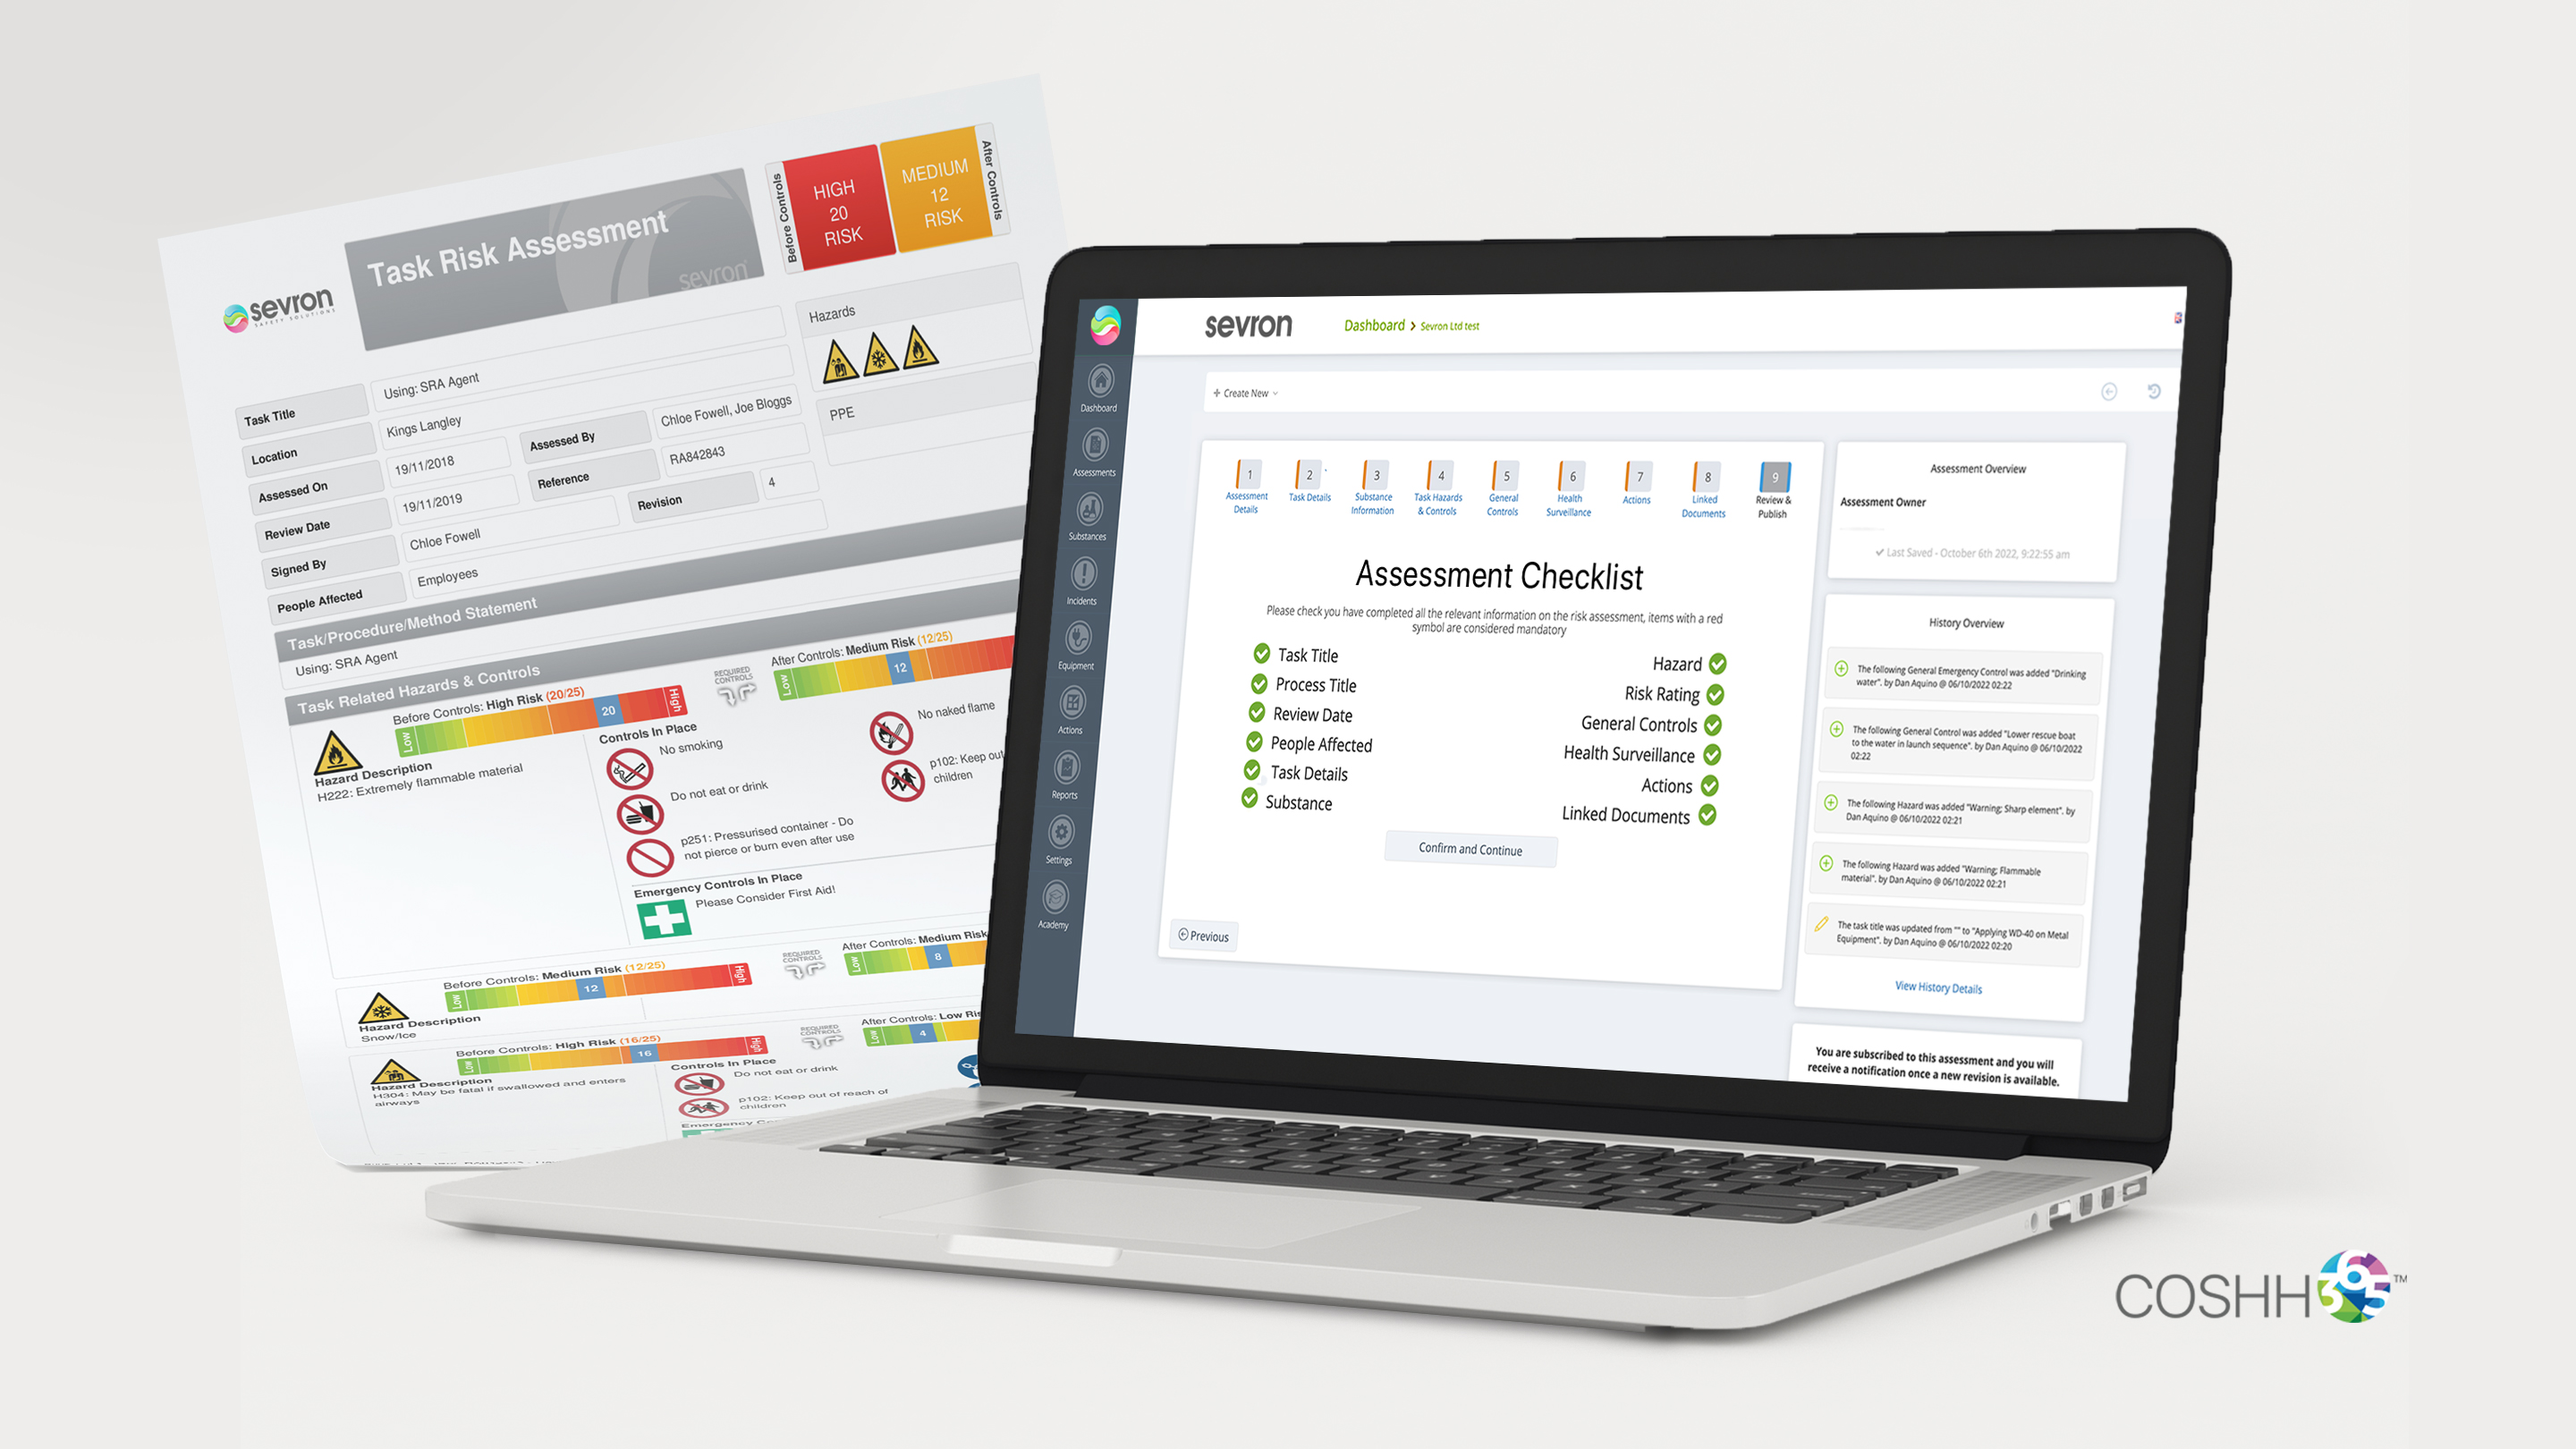 Ensure your compliance with COSHH using our Assessment Checklist. Manage chemical risk, safeguard your workplace and prevent accidents. With our simple assessment wizard, create risk assessments that are specifically tailored to make you compliant.​